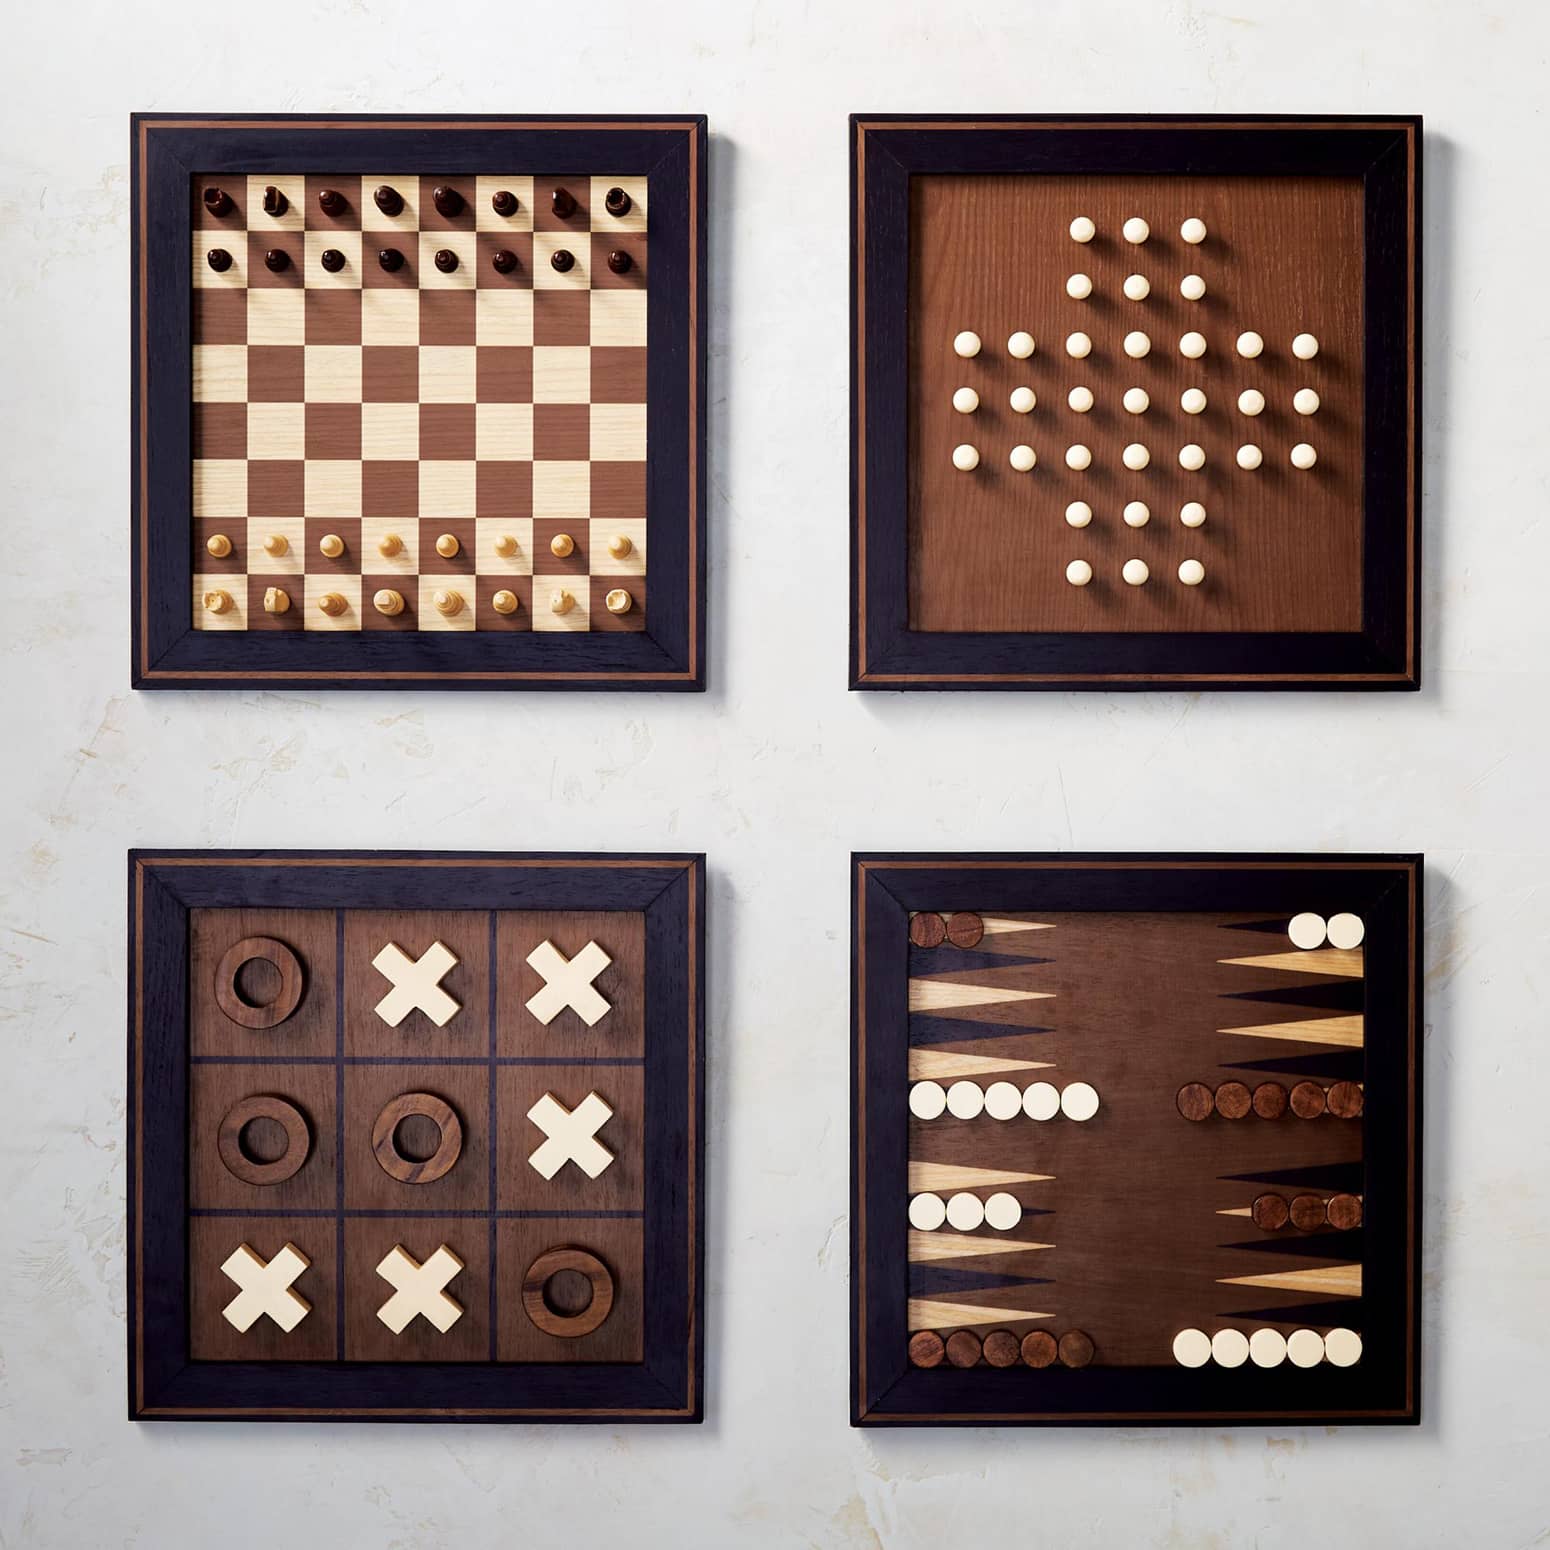 Magnetic Wall Game Collection - Chess, Backgammon, Tic-Tac-Toe, Solitaire